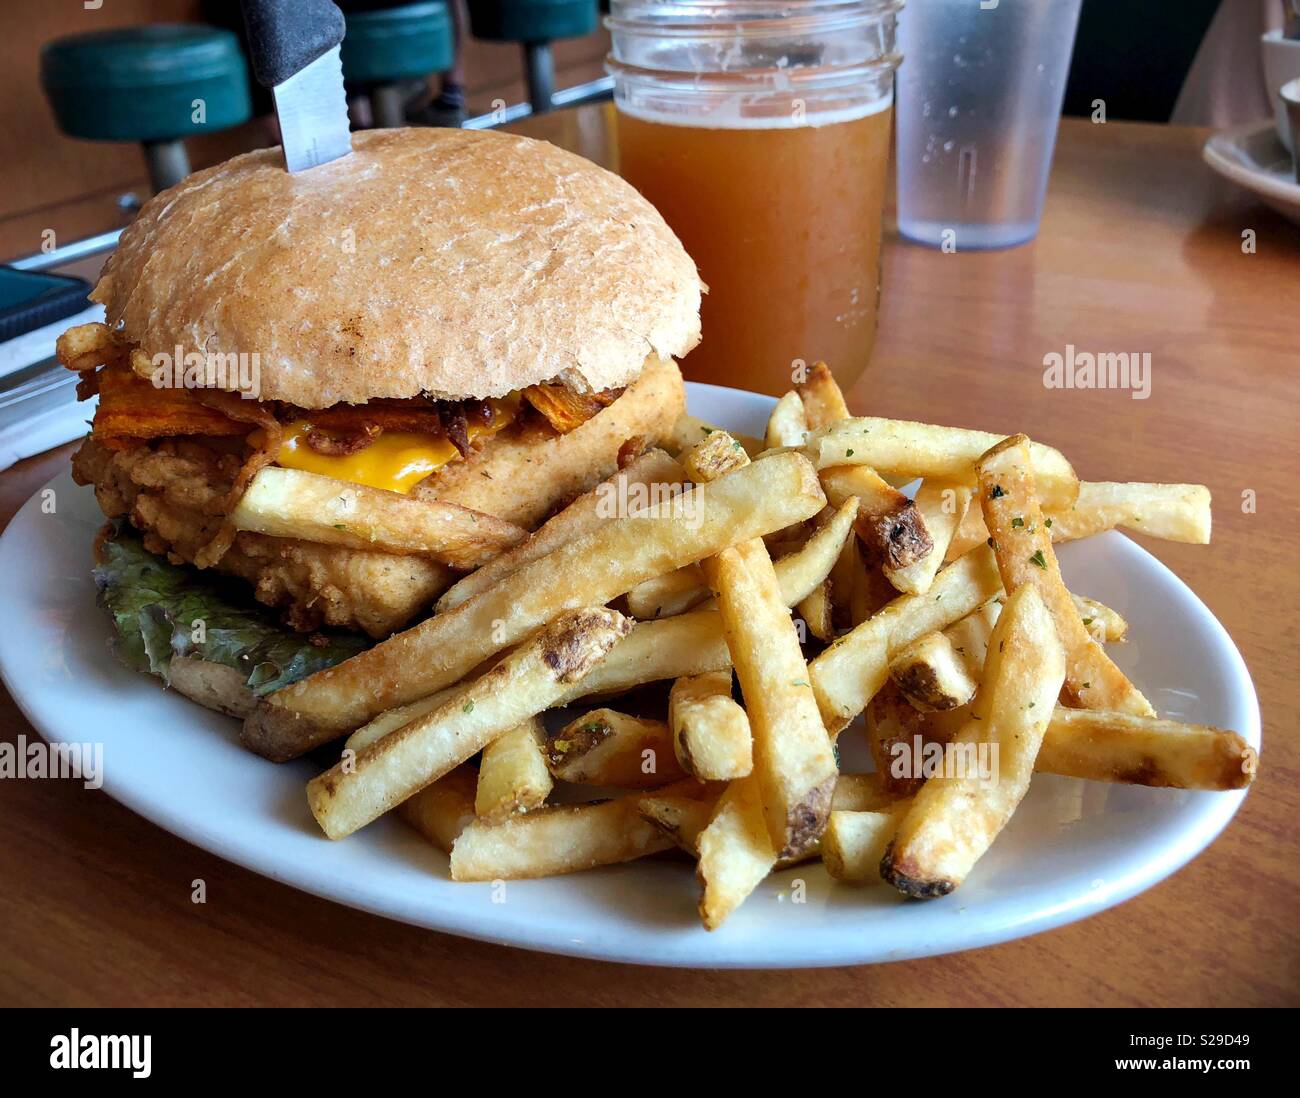 A vegan tofu burger and fries from Cornbread Cafe in Eugene, Oregon, USA. Stock Photo